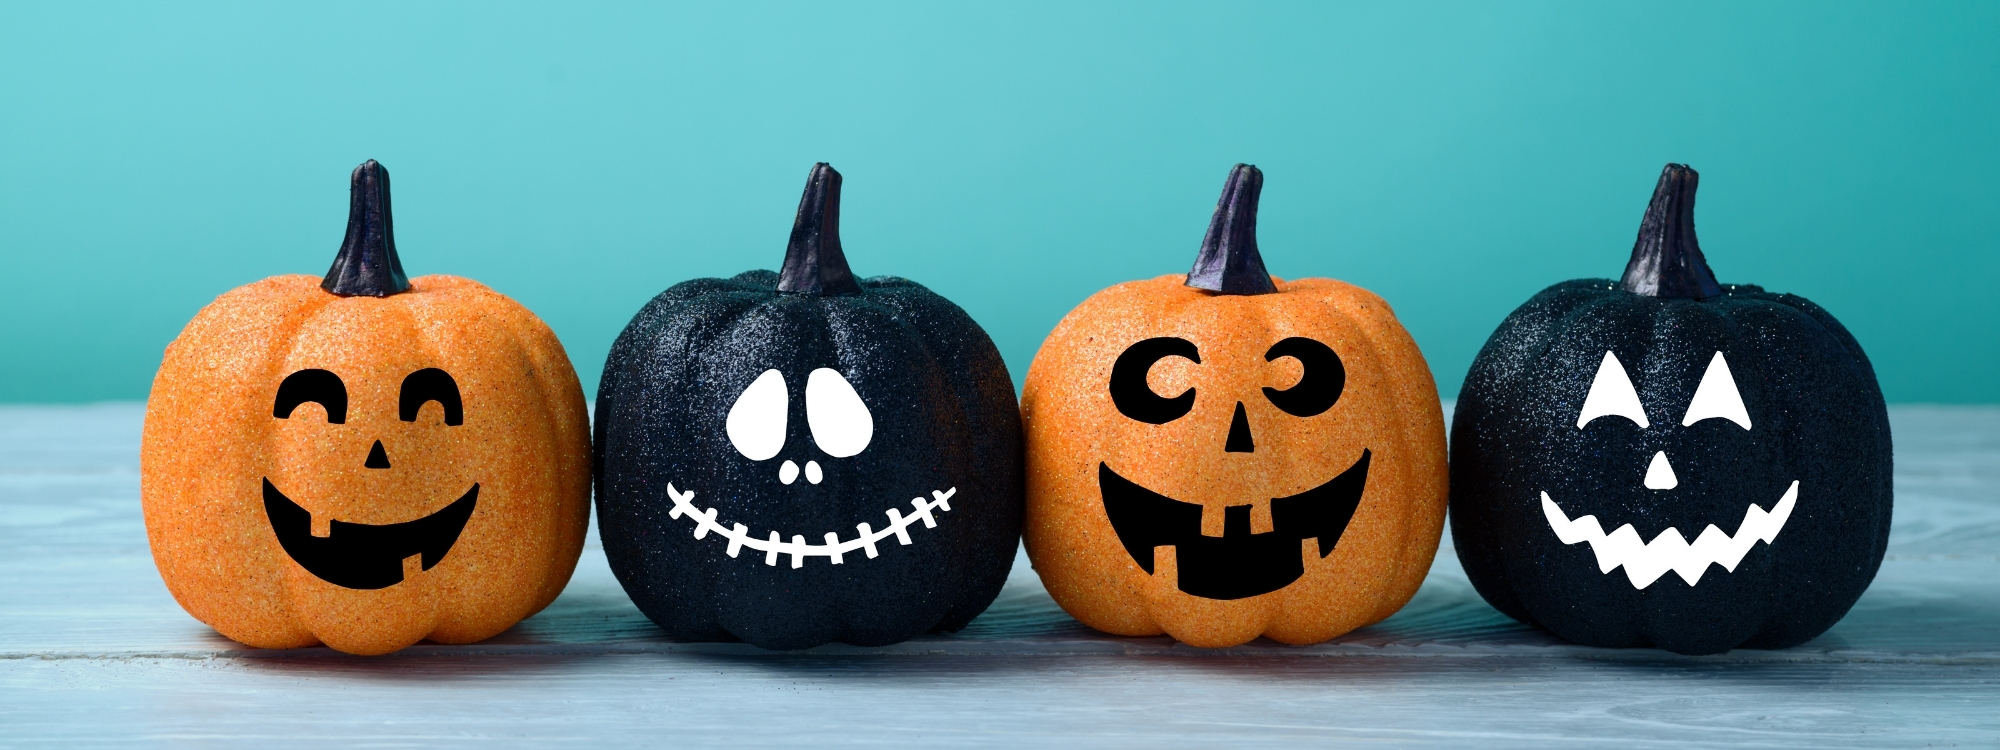 Halloween Scary Myths about Coaching